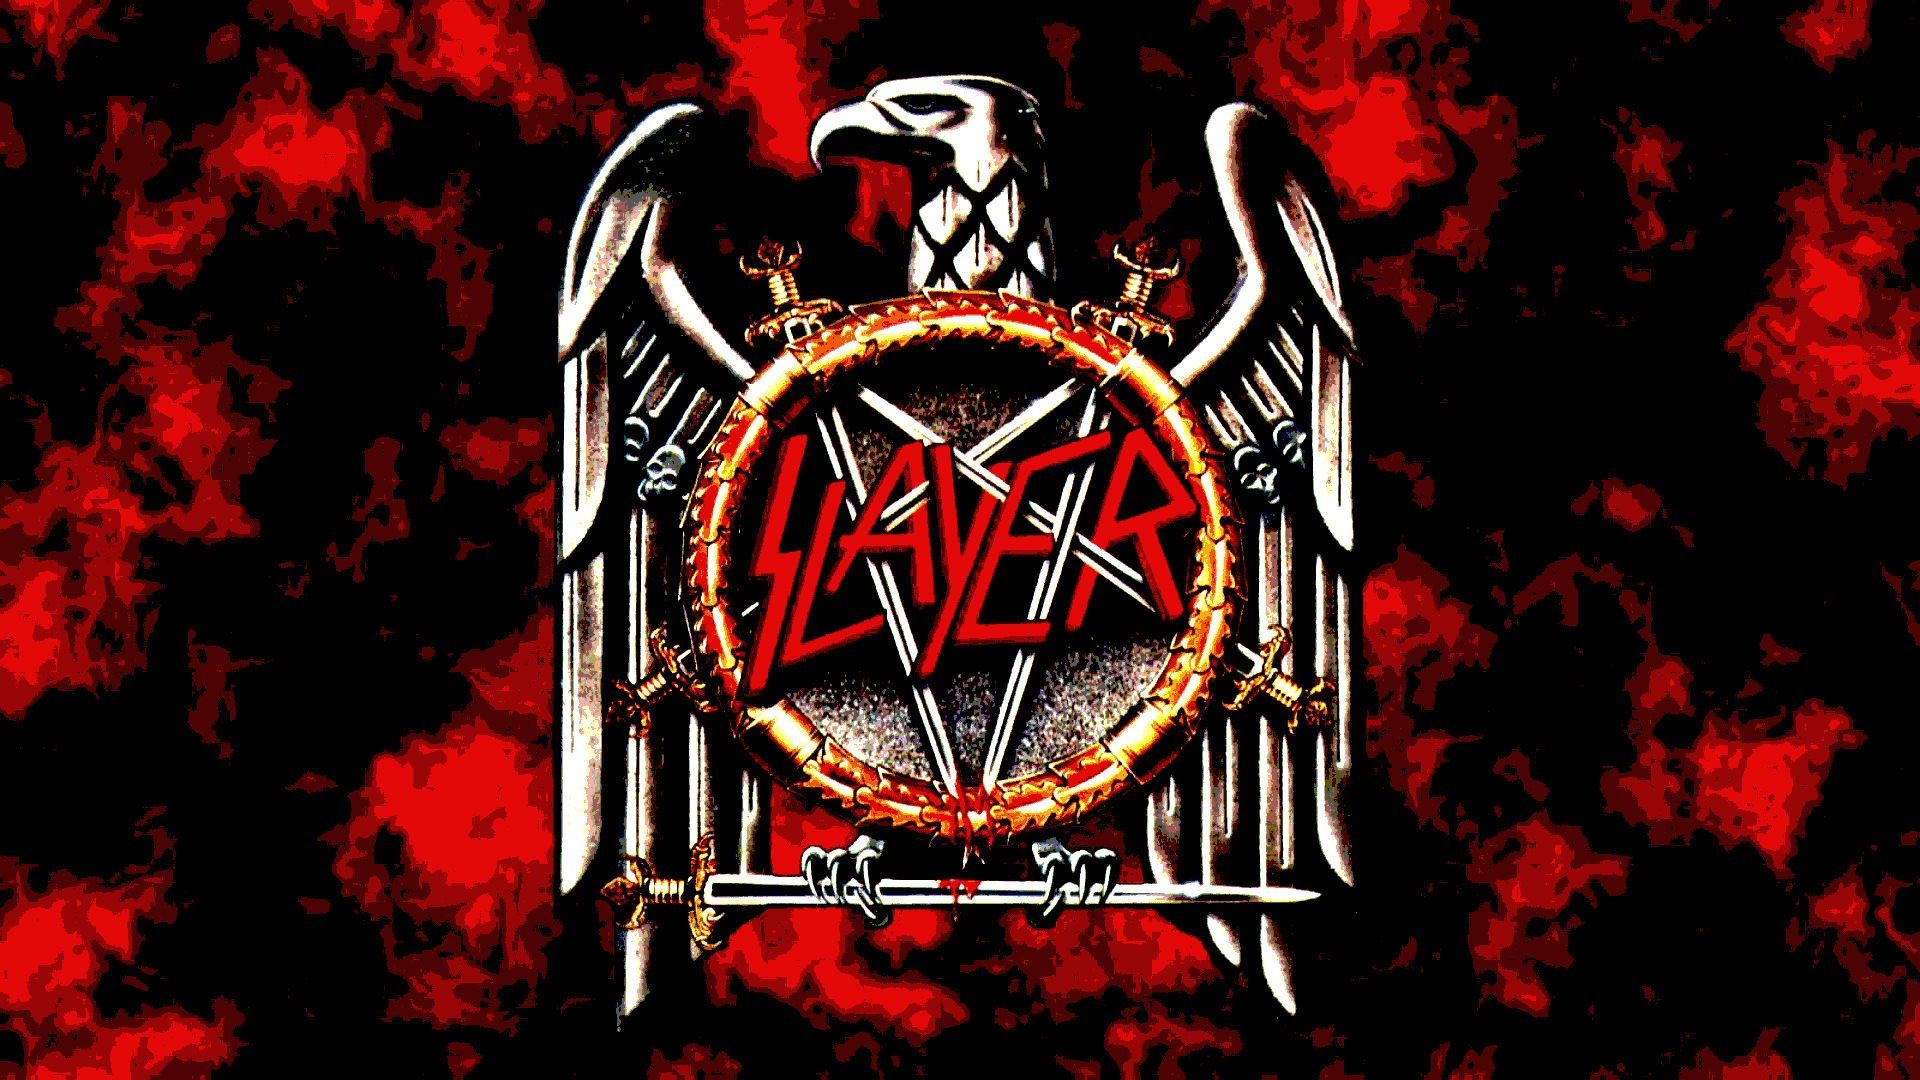 Free Download Slayer Band Wallpapers 1920x1080